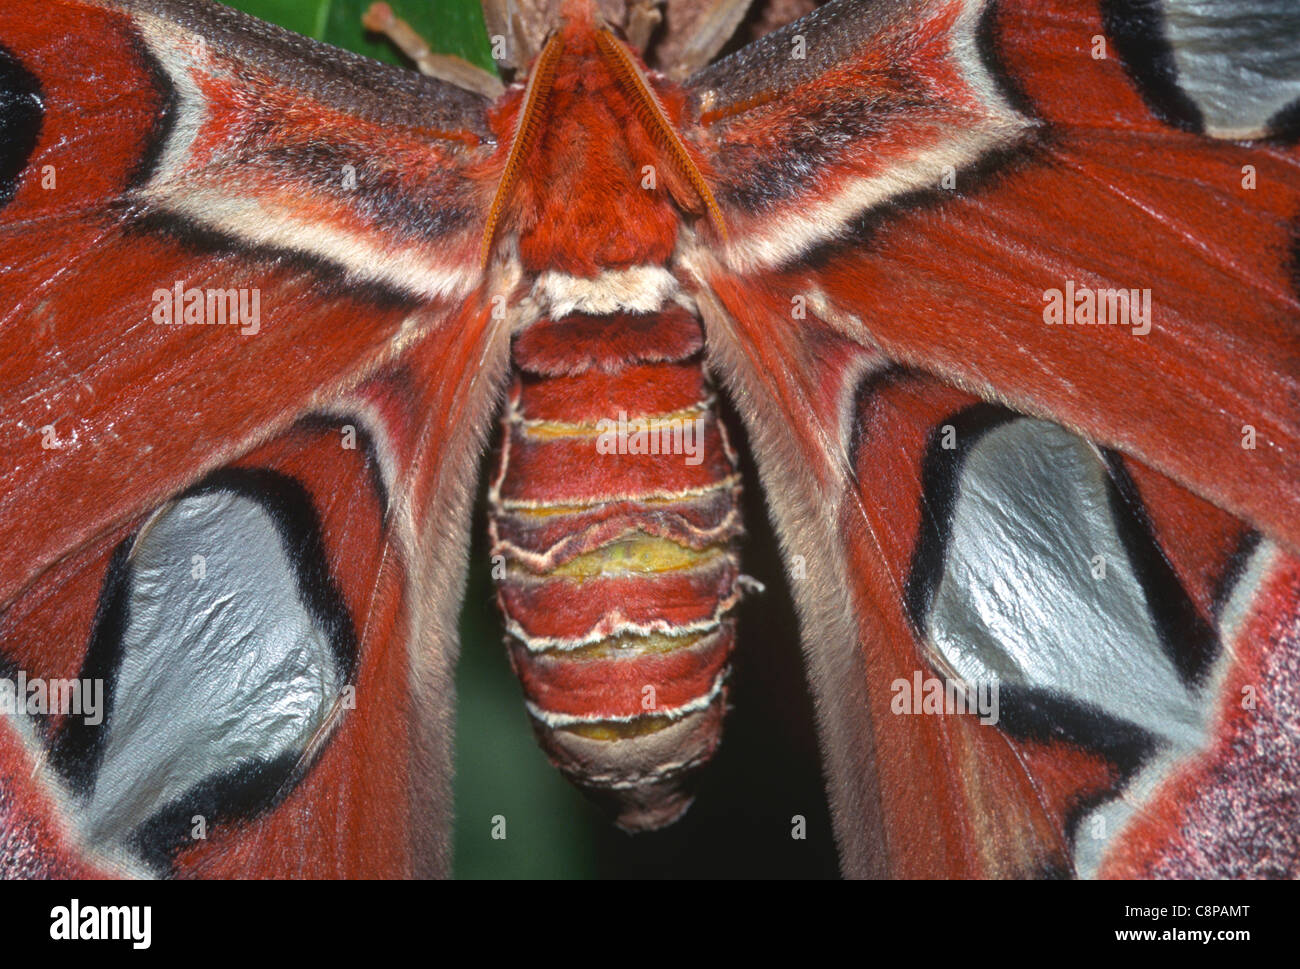 ATLAS MOTH (Attacus atlas), close up detail of body and wings, largest moths in the world, native to southeast Asia Stock Photo